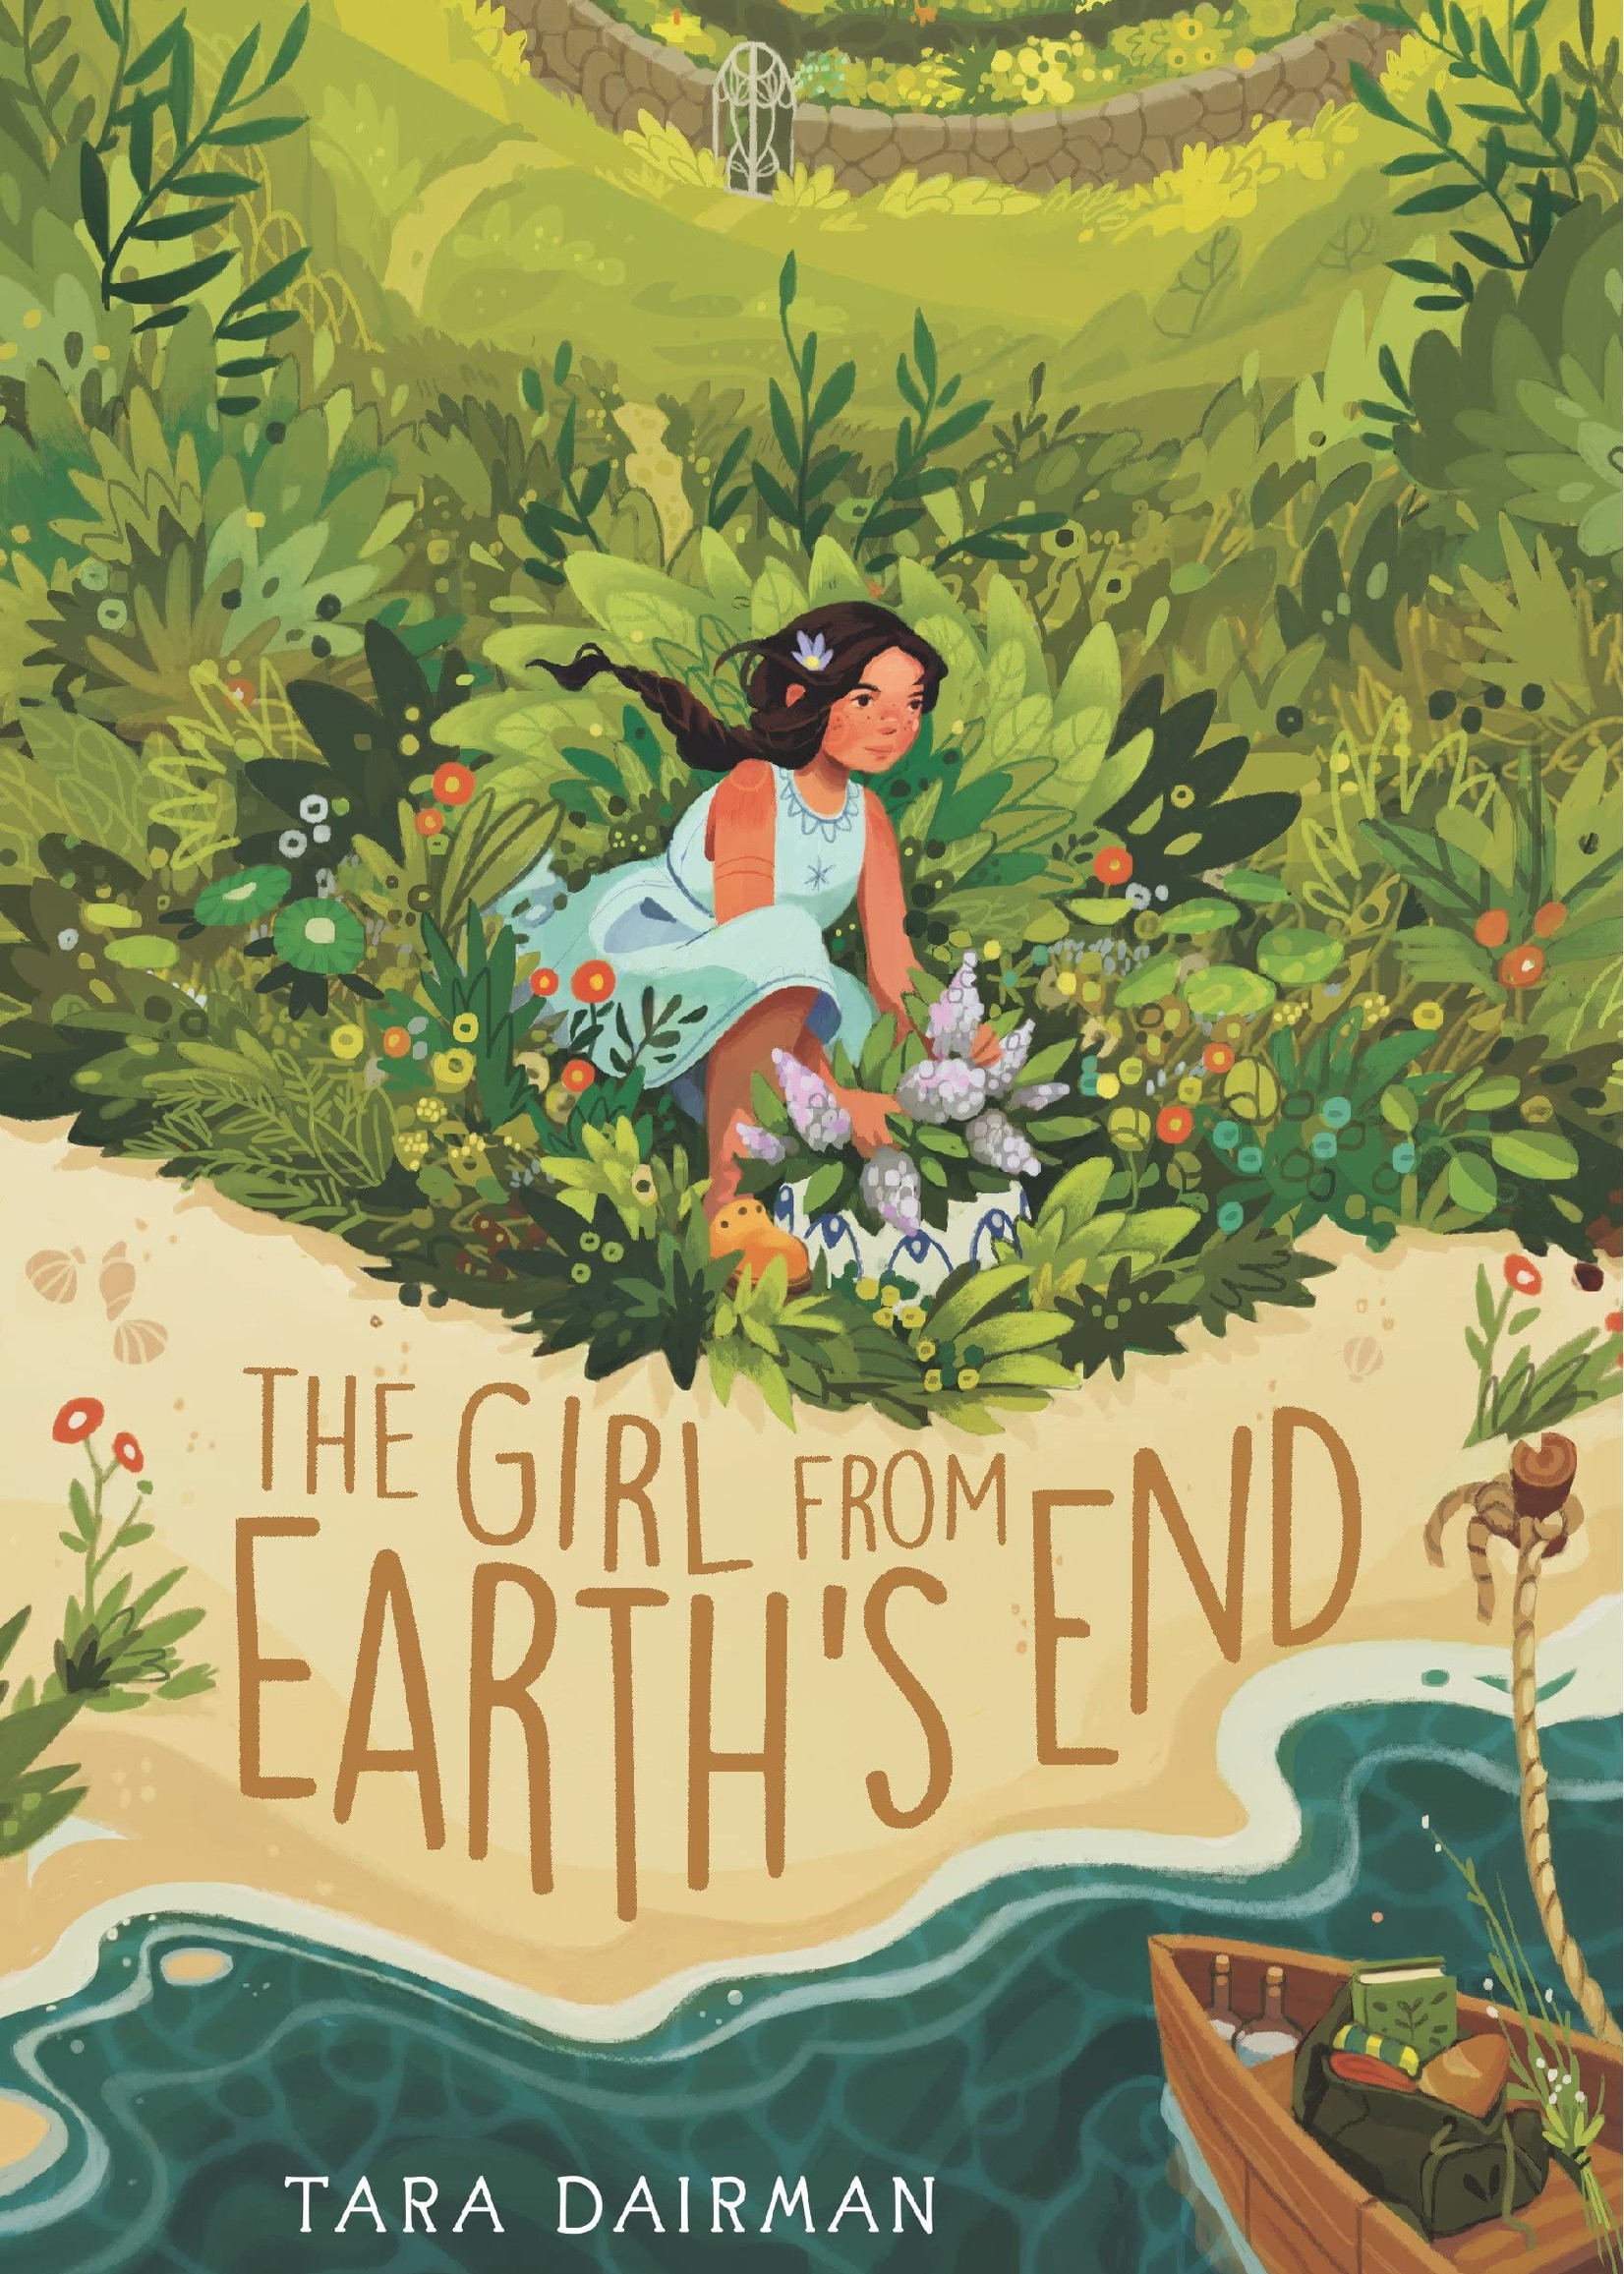 The Girl from Earth's End - Hardcover